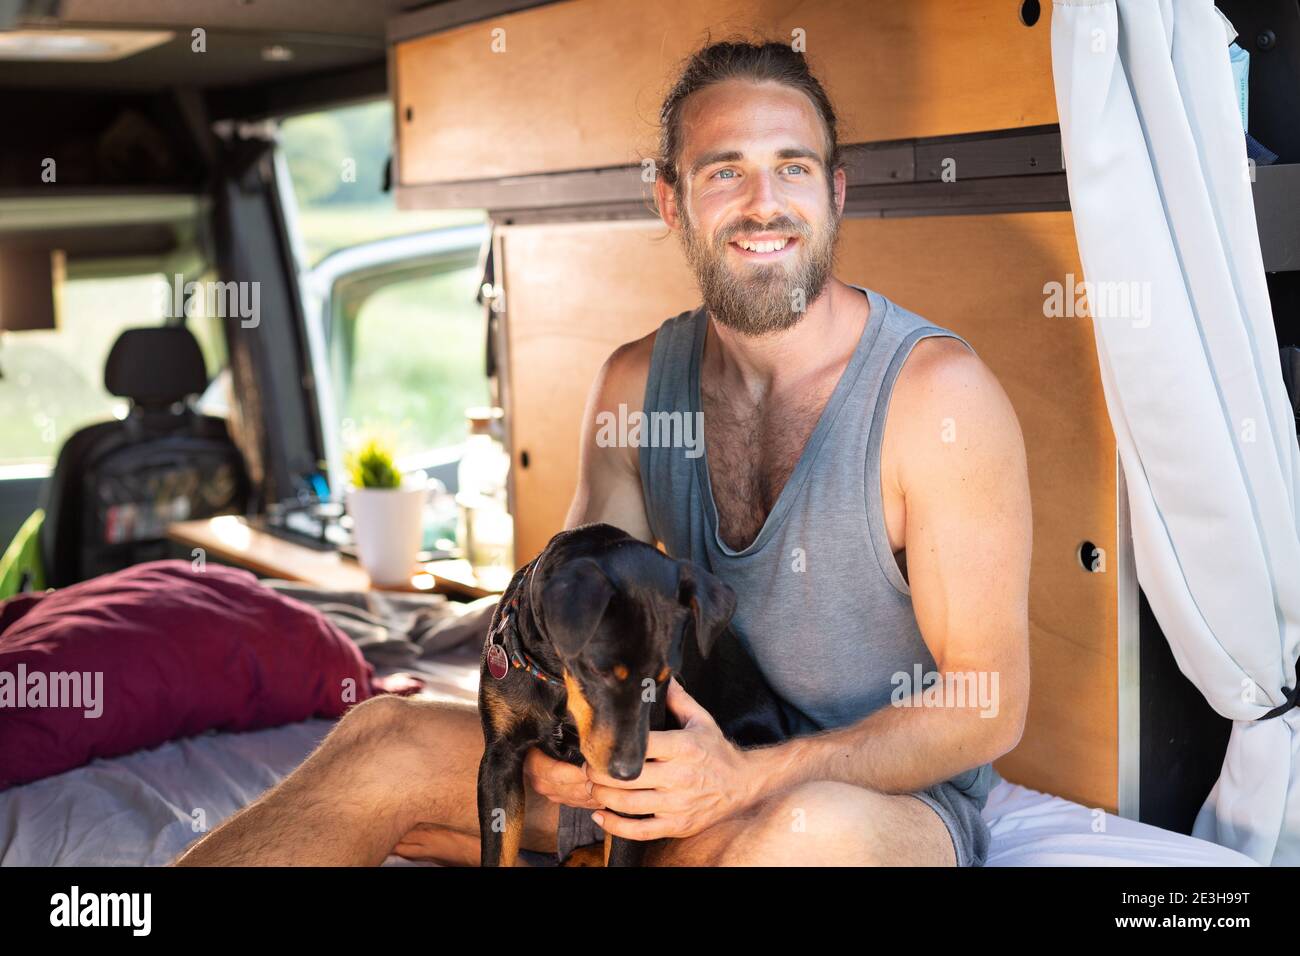 Smiling man and his dog inside a camper van Stock Photo